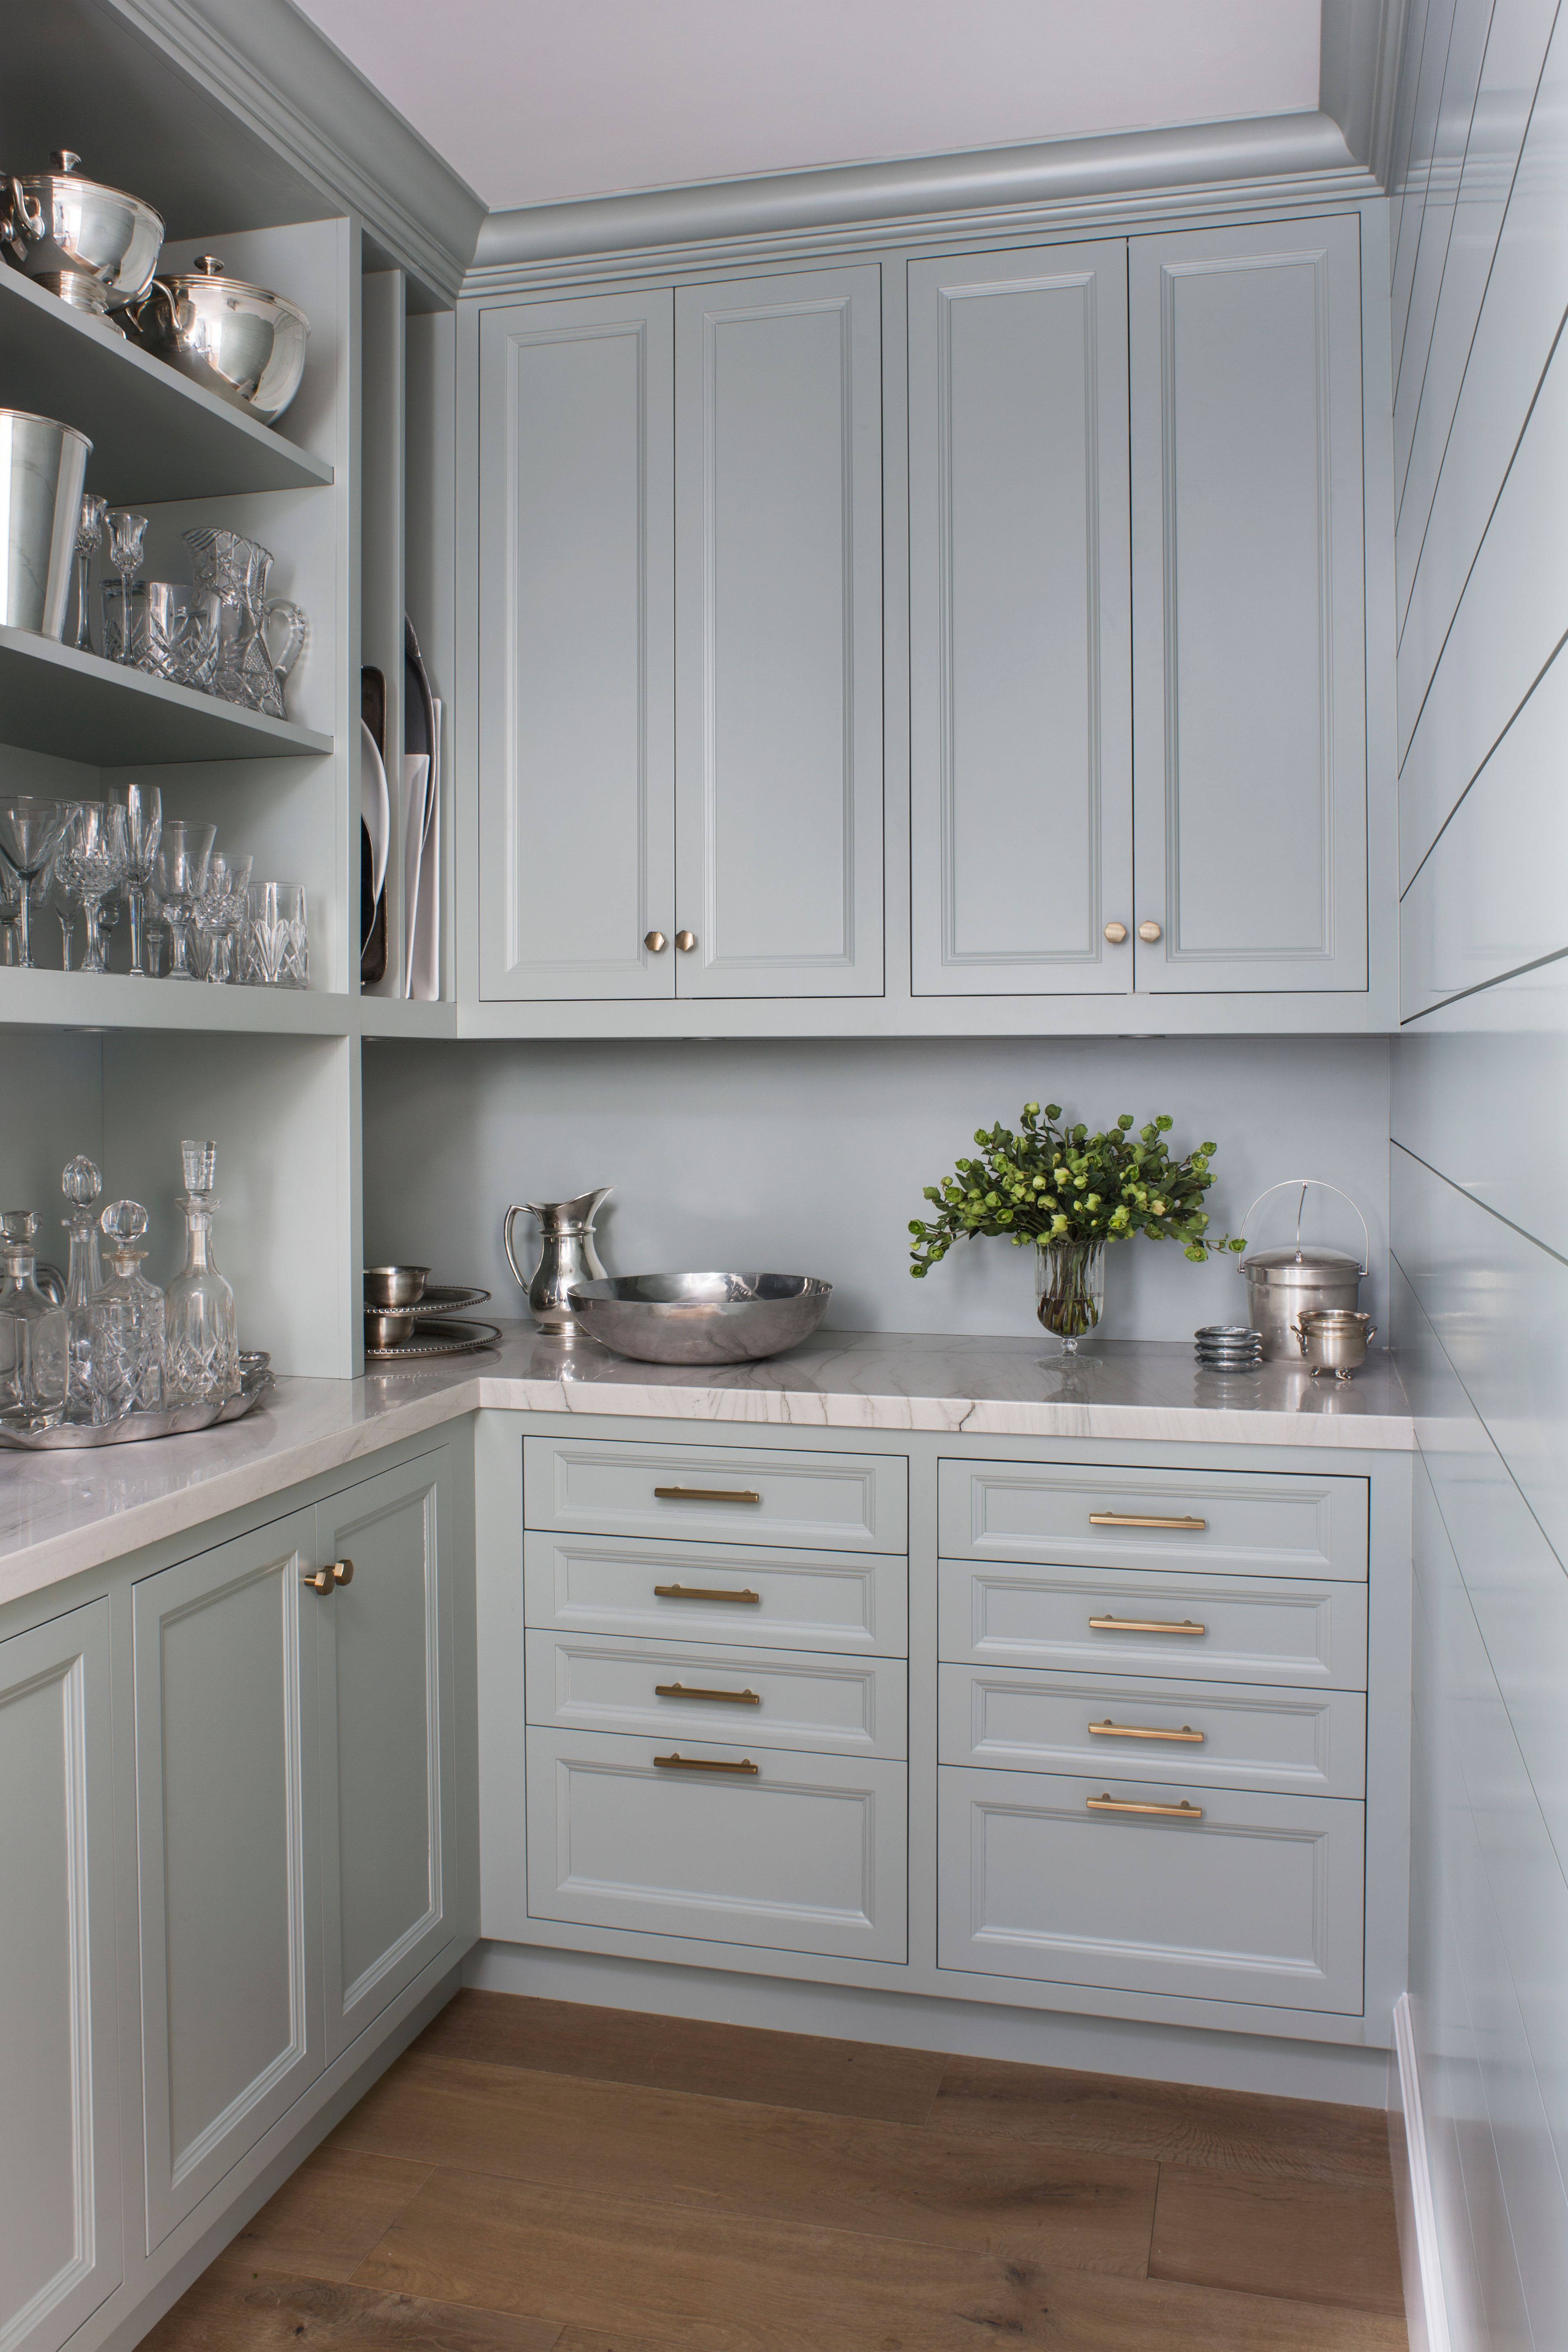 Oak kitchen cabinets is one of the hottest kitchen trends in 2023